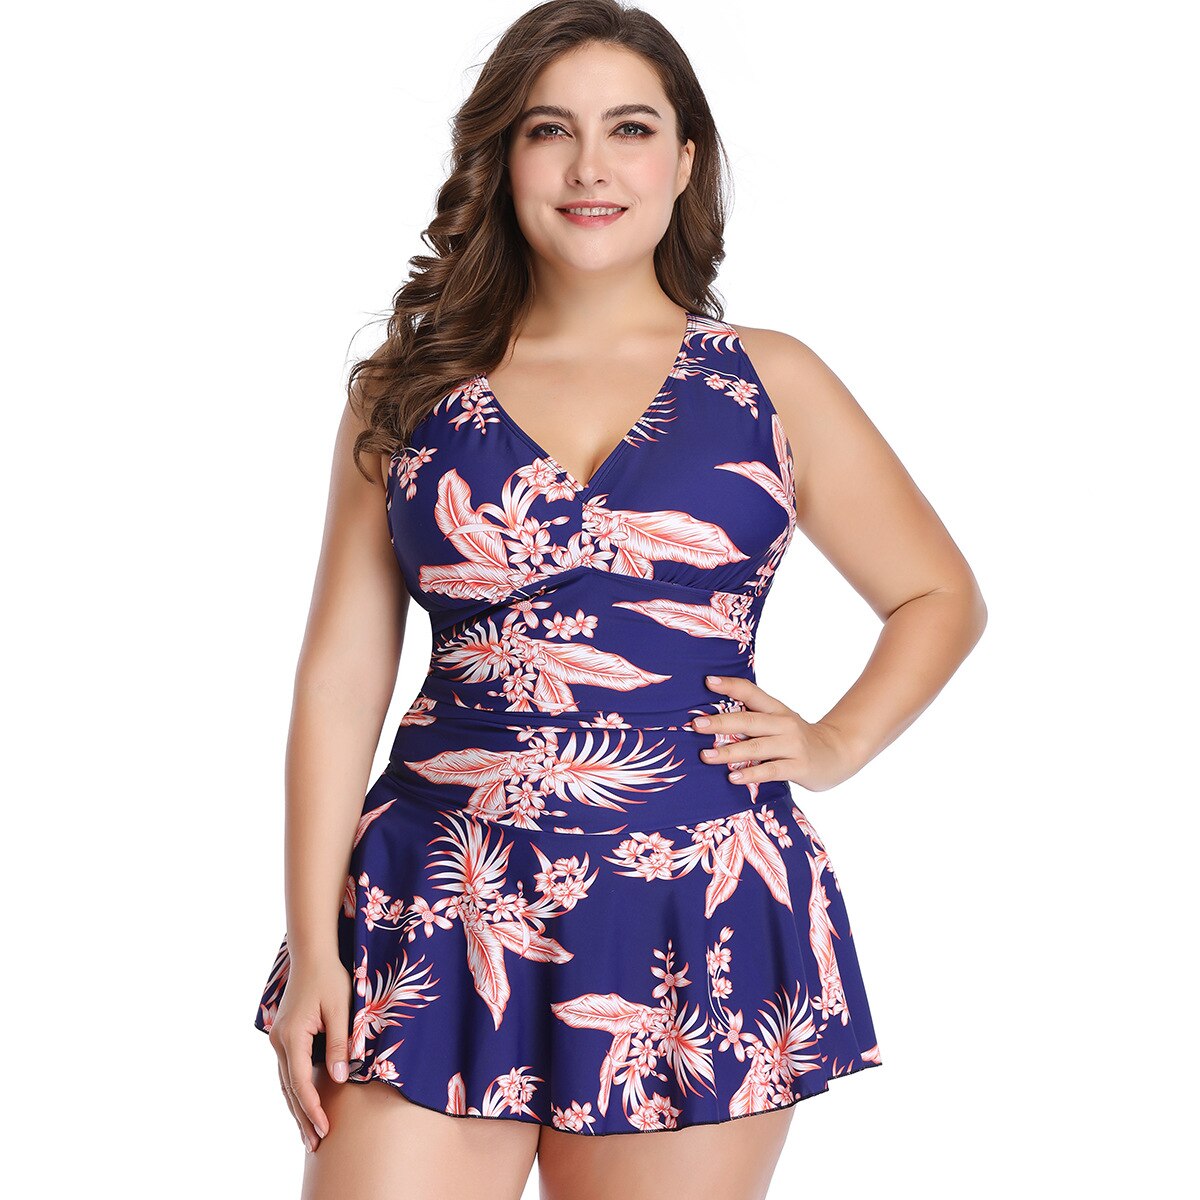 Plus-size swimwear Solid color printed skirt